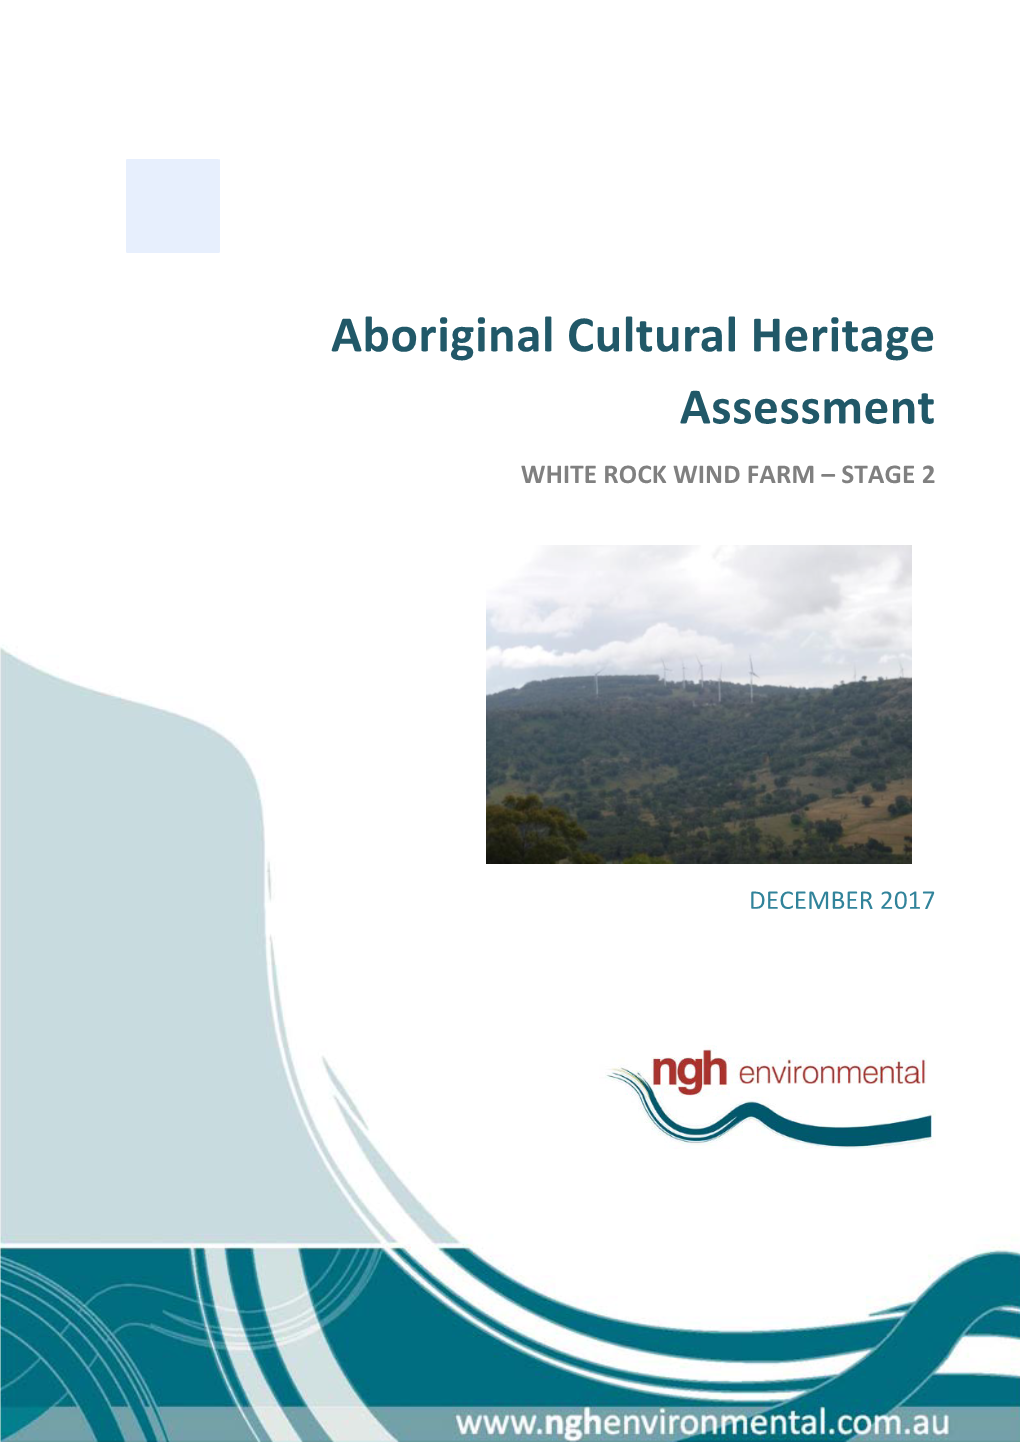 Aboriginal Cultural Heritage Assessment WHITE ROCK WIND FARM – STAGE 2